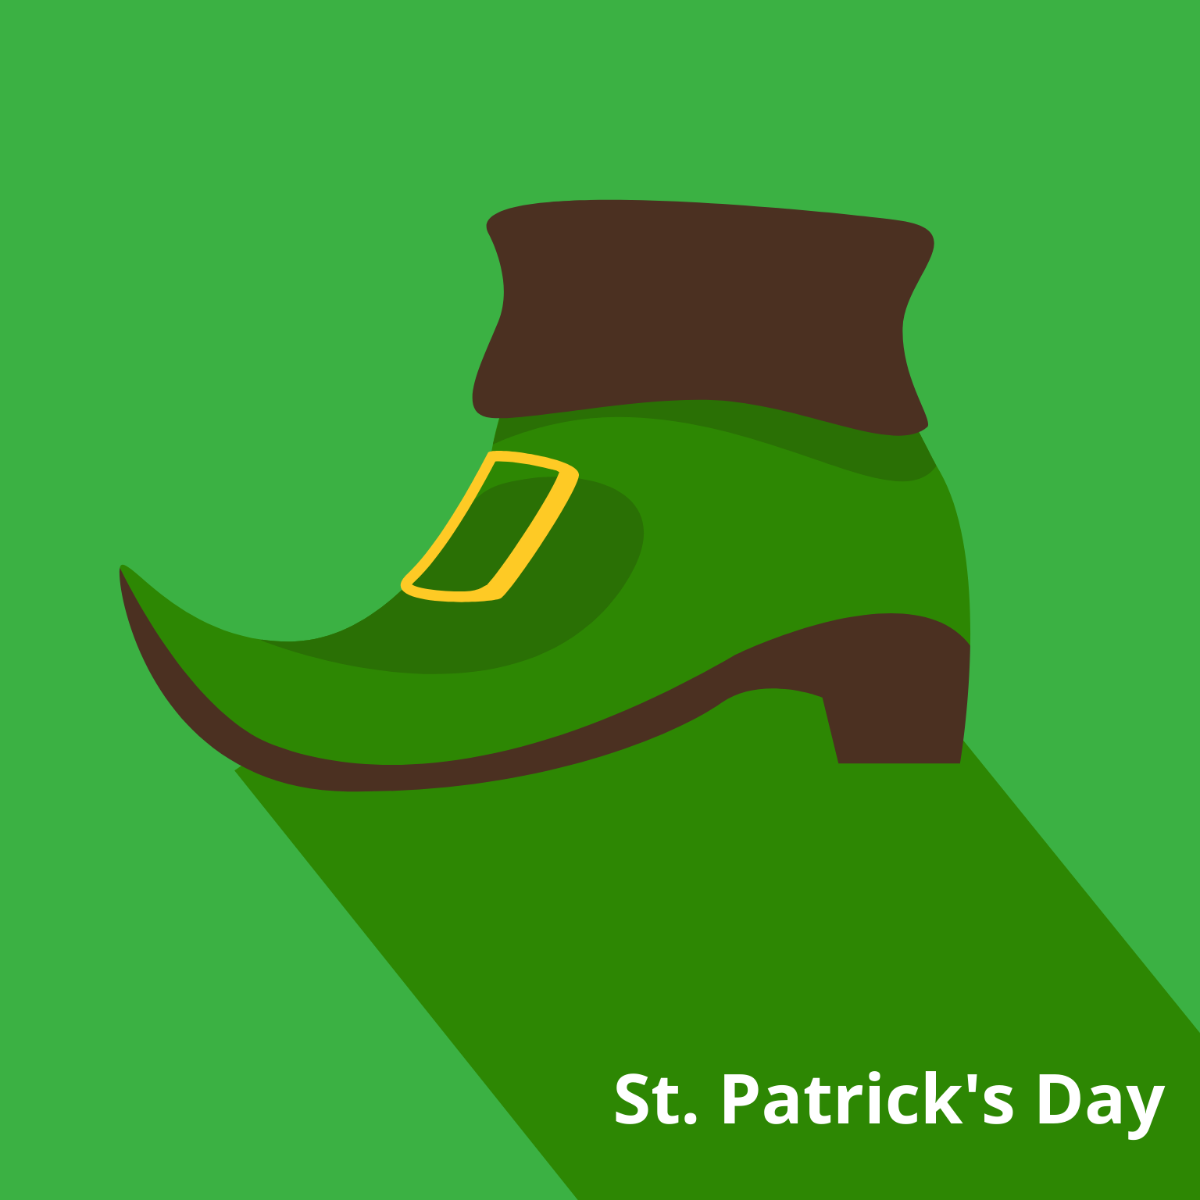 St. Patrick's Day Flat Design Vector Template